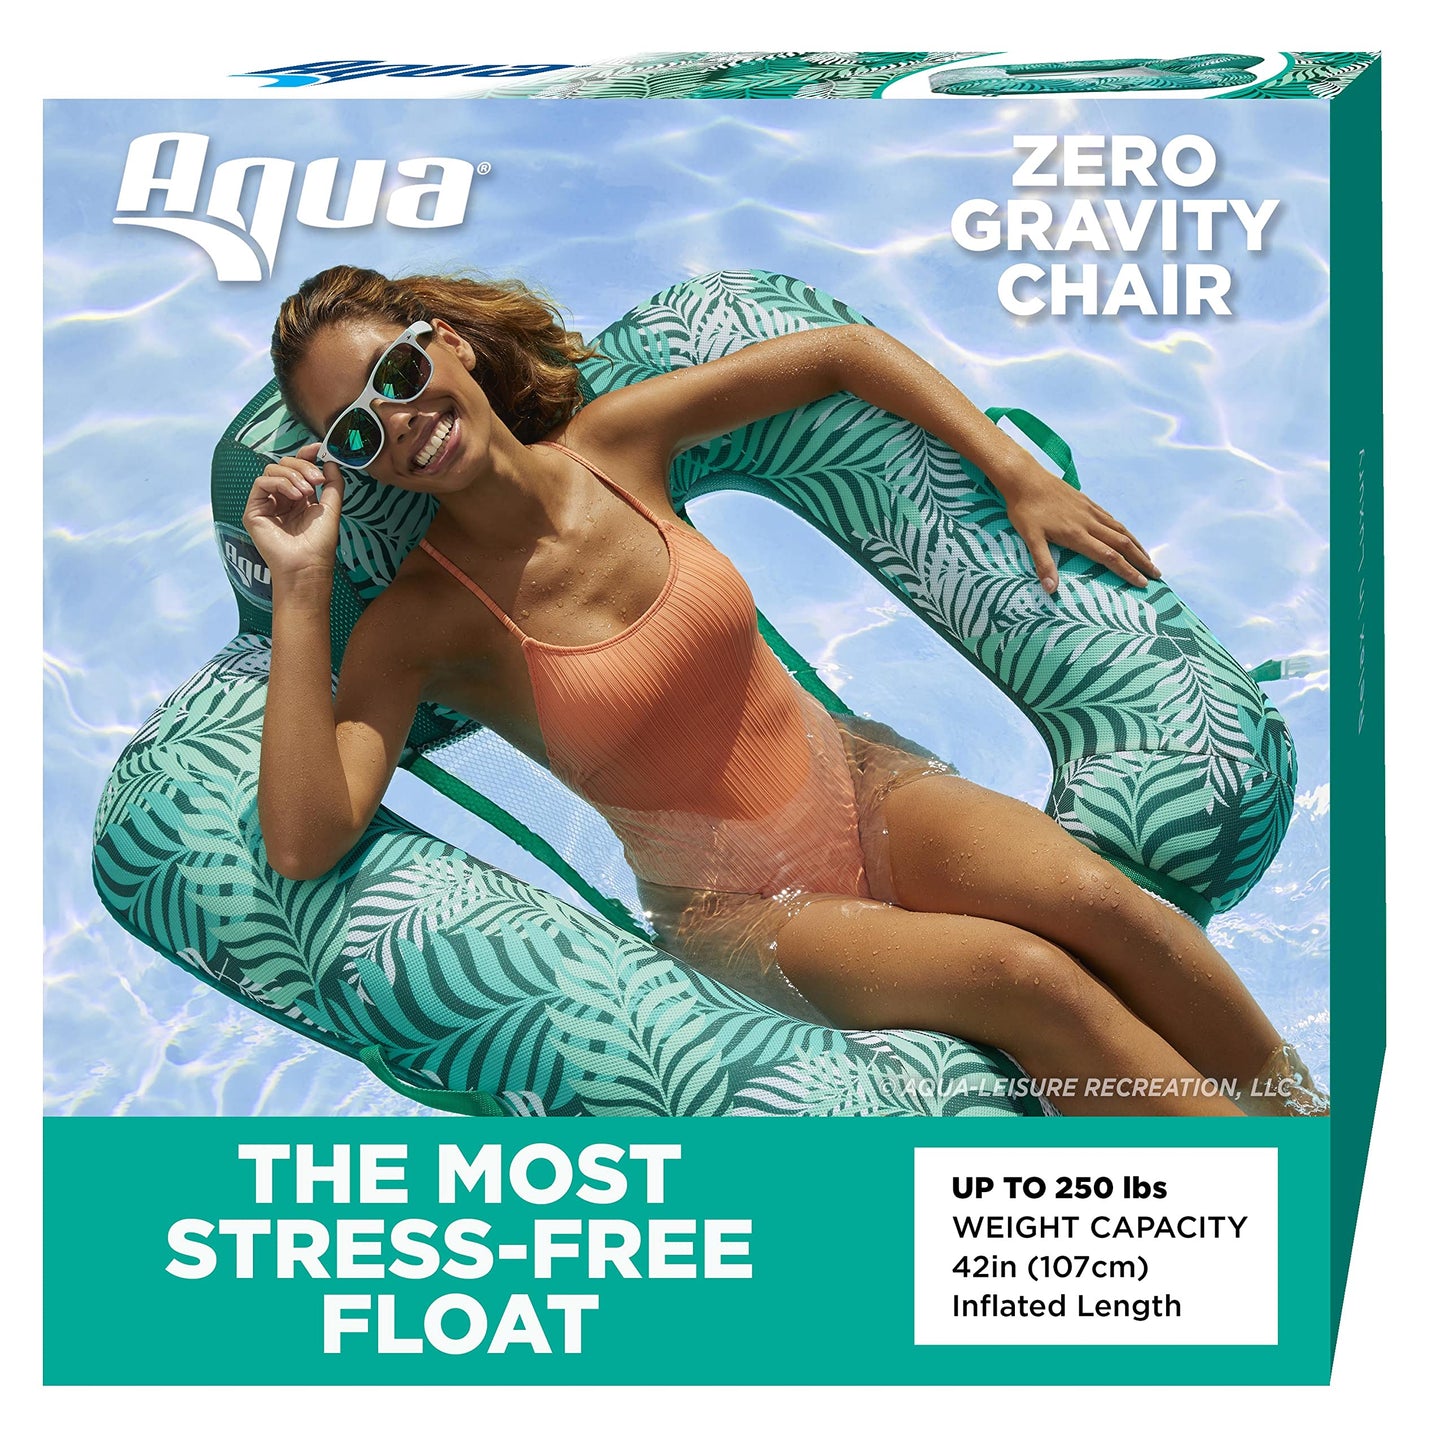 Aqua Pool Chair Float Lounge for Adults – Multiple Colors/Shapes/Styles – for Adults and Kids Floating Zero Gravity Pool Chair Teal Fern